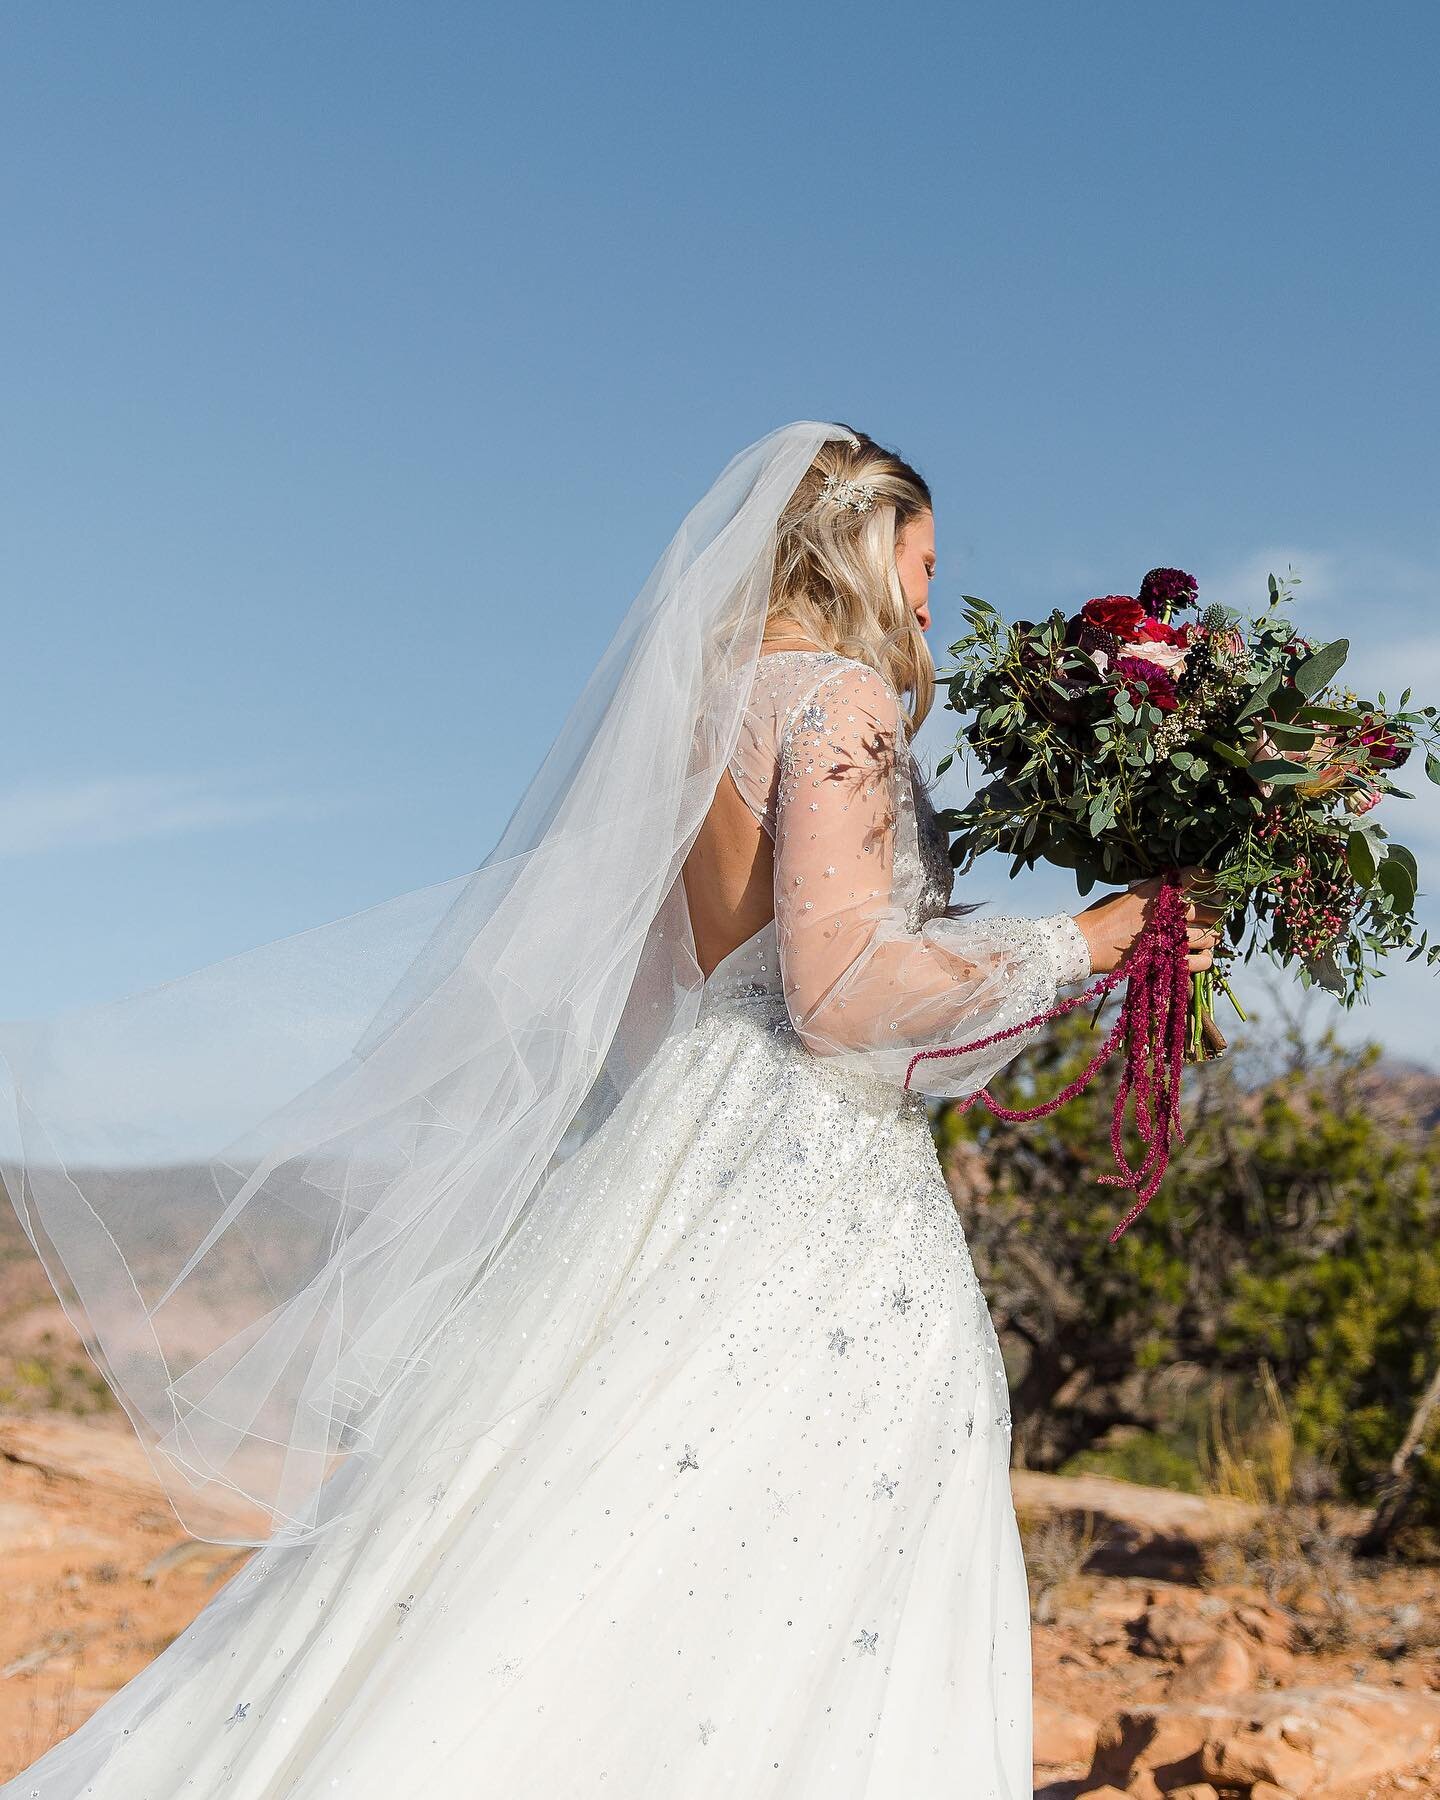 You know it&rsquo;s going to be a memorable day when the only way to the ceremony site is an off-road excursion through the La Sal Mountains of Moab. 🏜🥂And look at those little stars on her dress! 🥹

Coordinator: @wedding_moab 
Venue: Whispering O